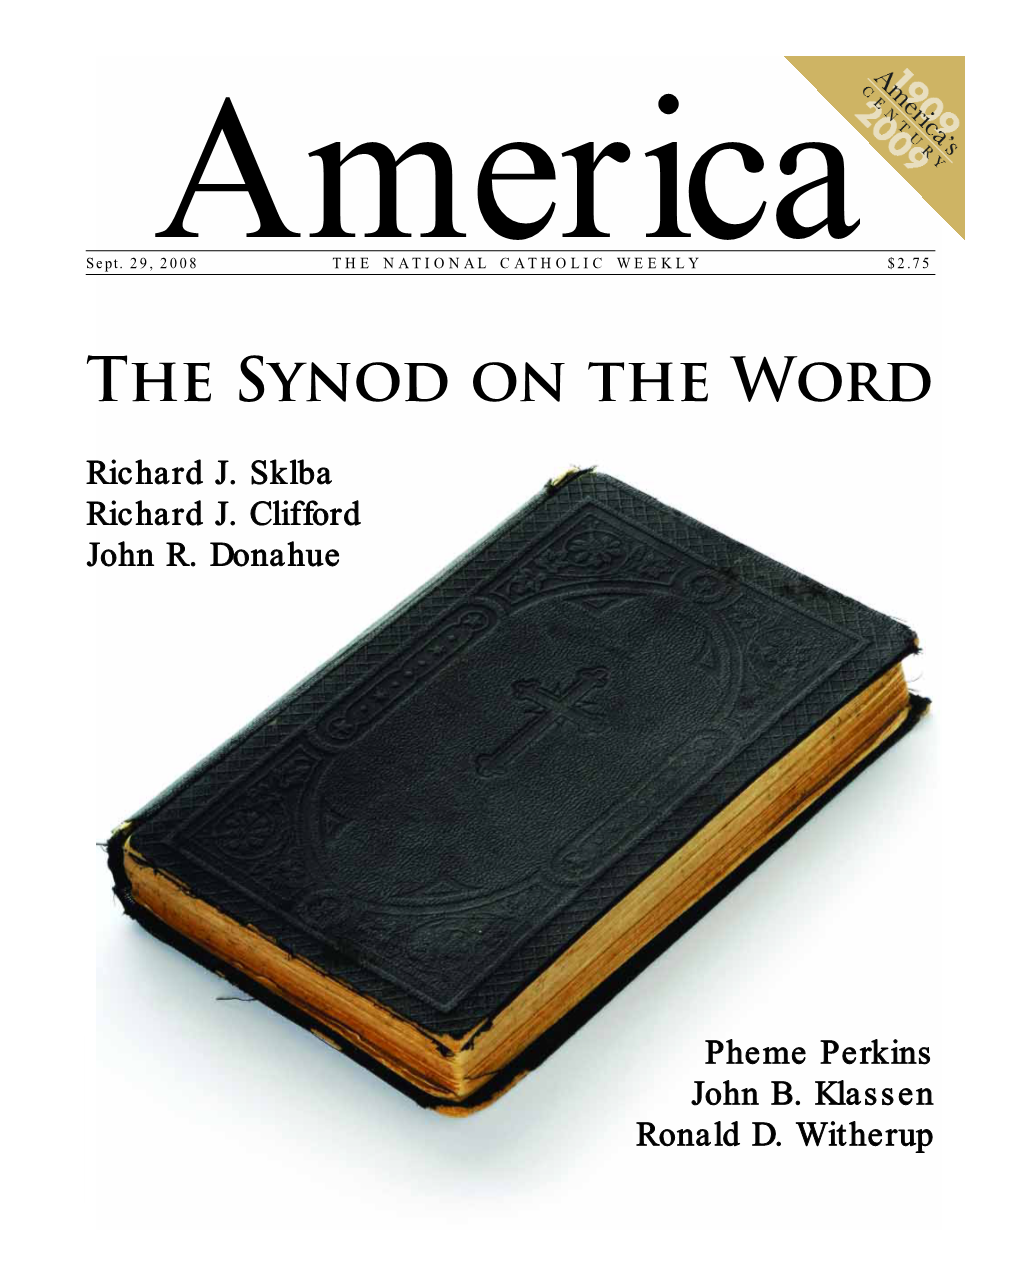 The Synod on the Word